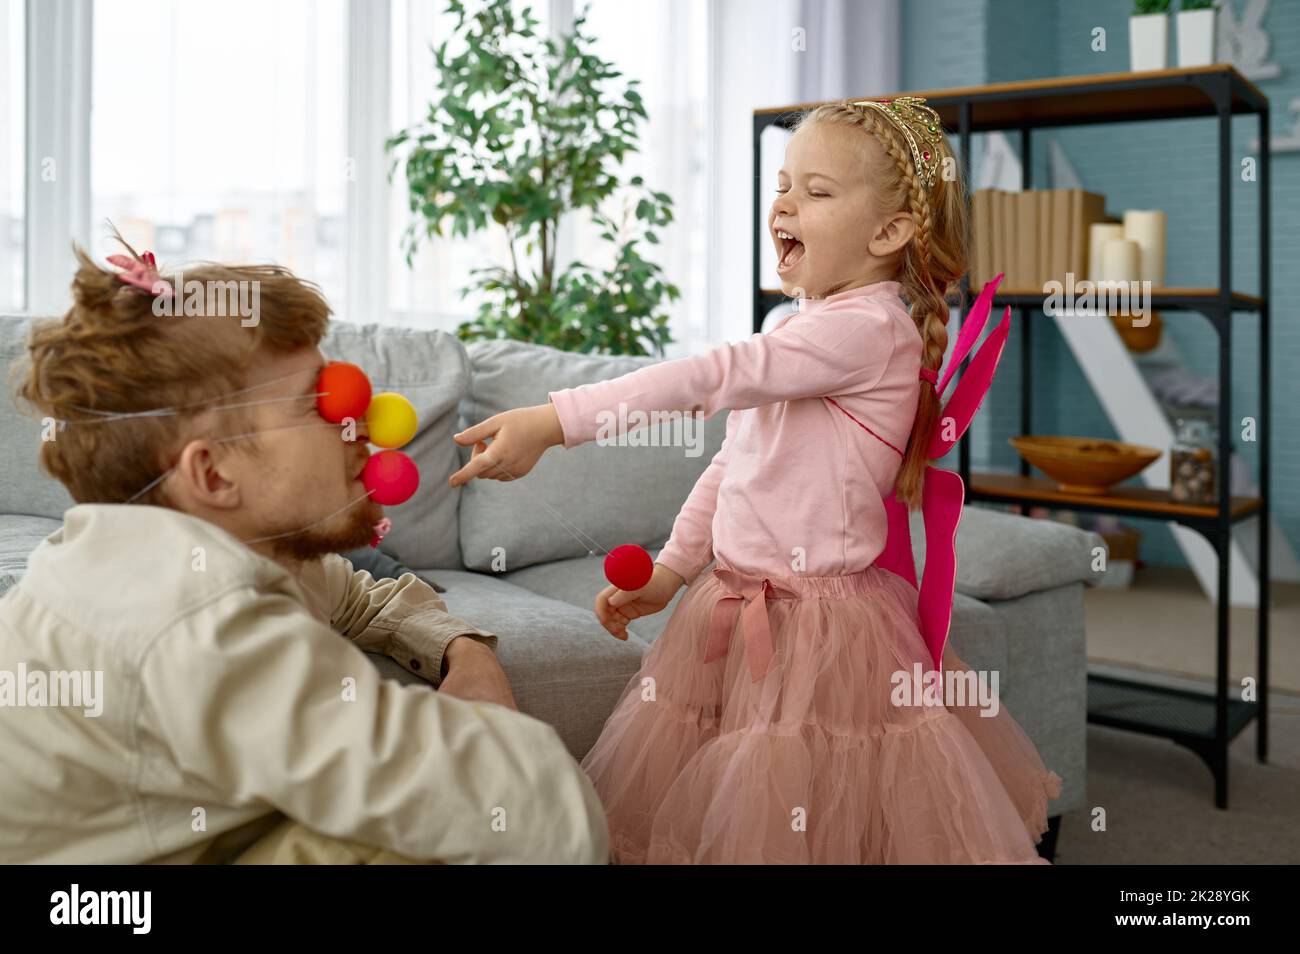 Playful father and daughter enjoy game together Stock Photo